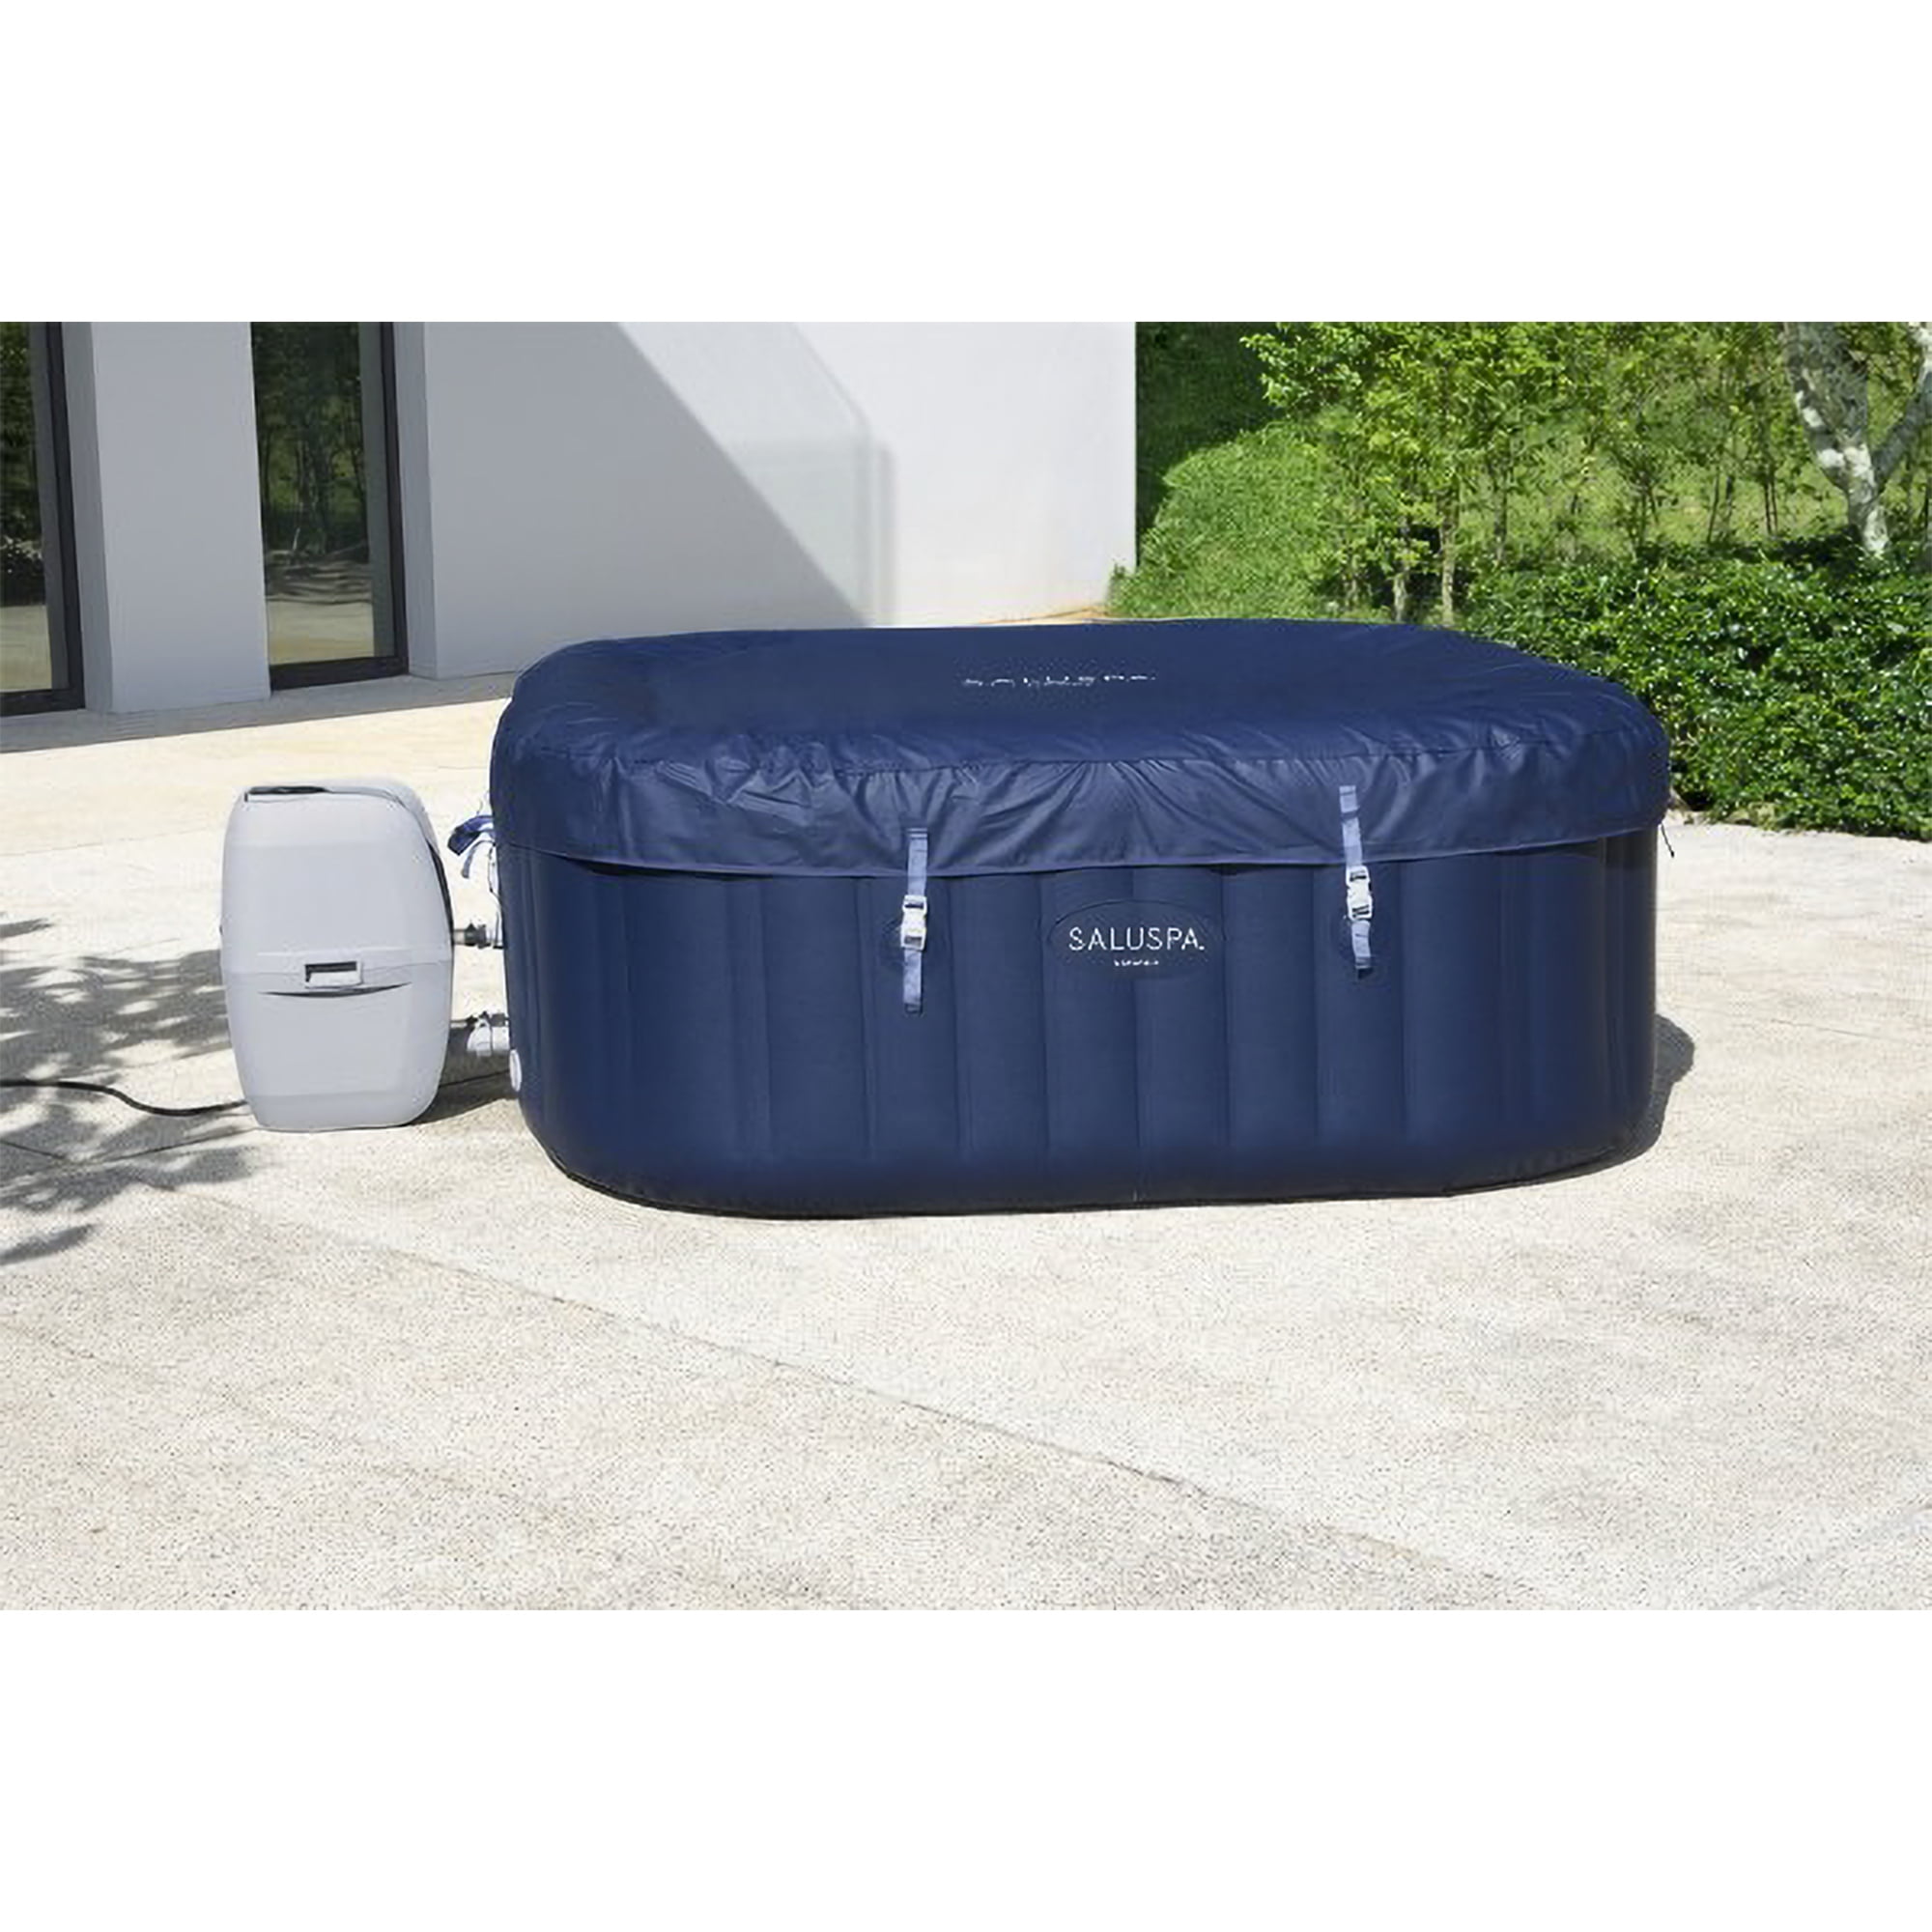 114 Hot Blue Jets, SaluSpa with AirJet Bestway Inflatable Hawaii Tub